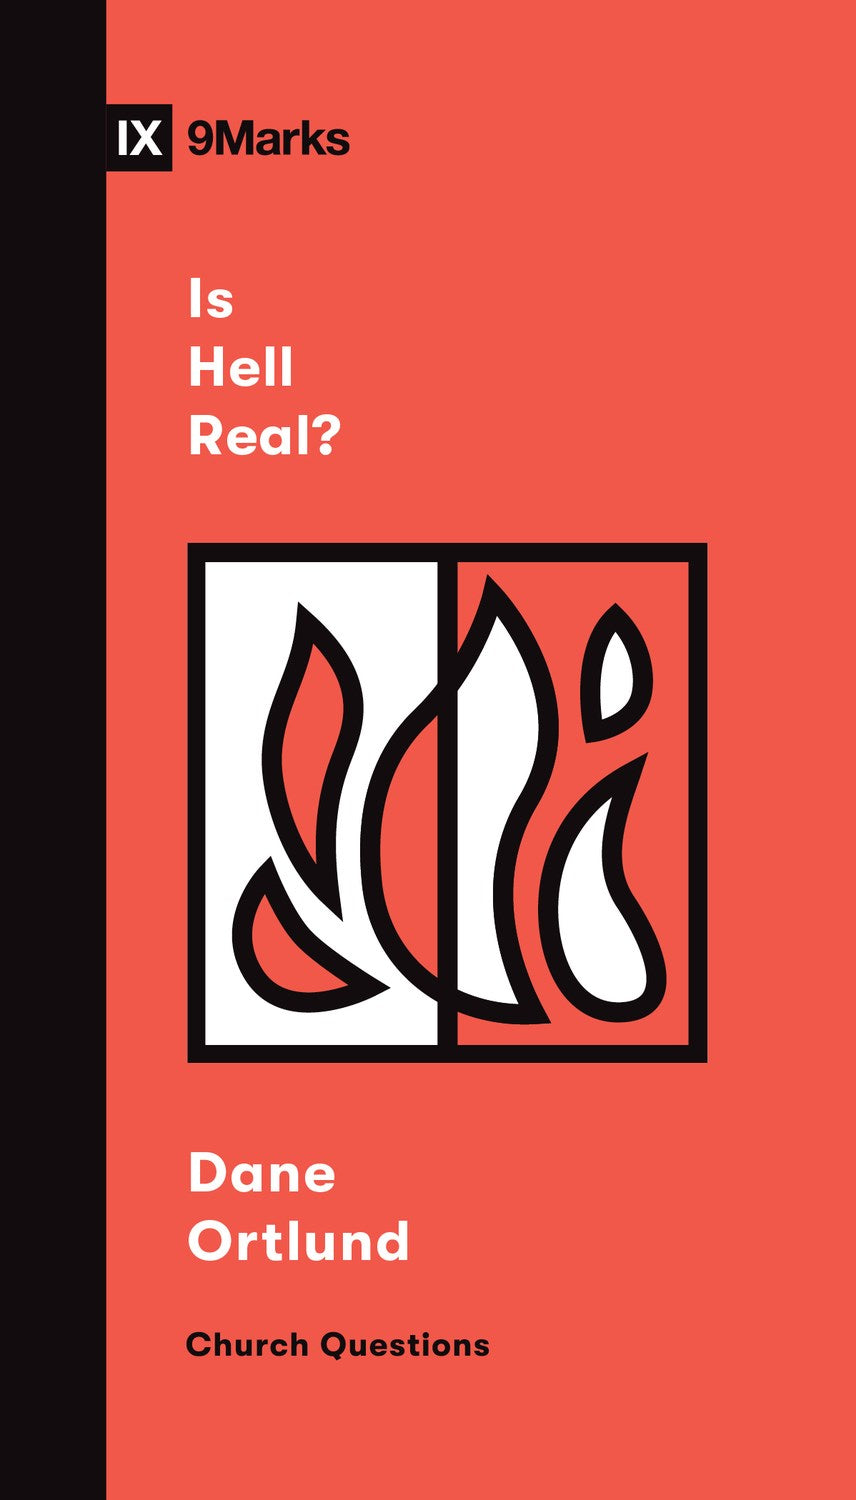 Is Hell Real? (9Marks Church Questions)